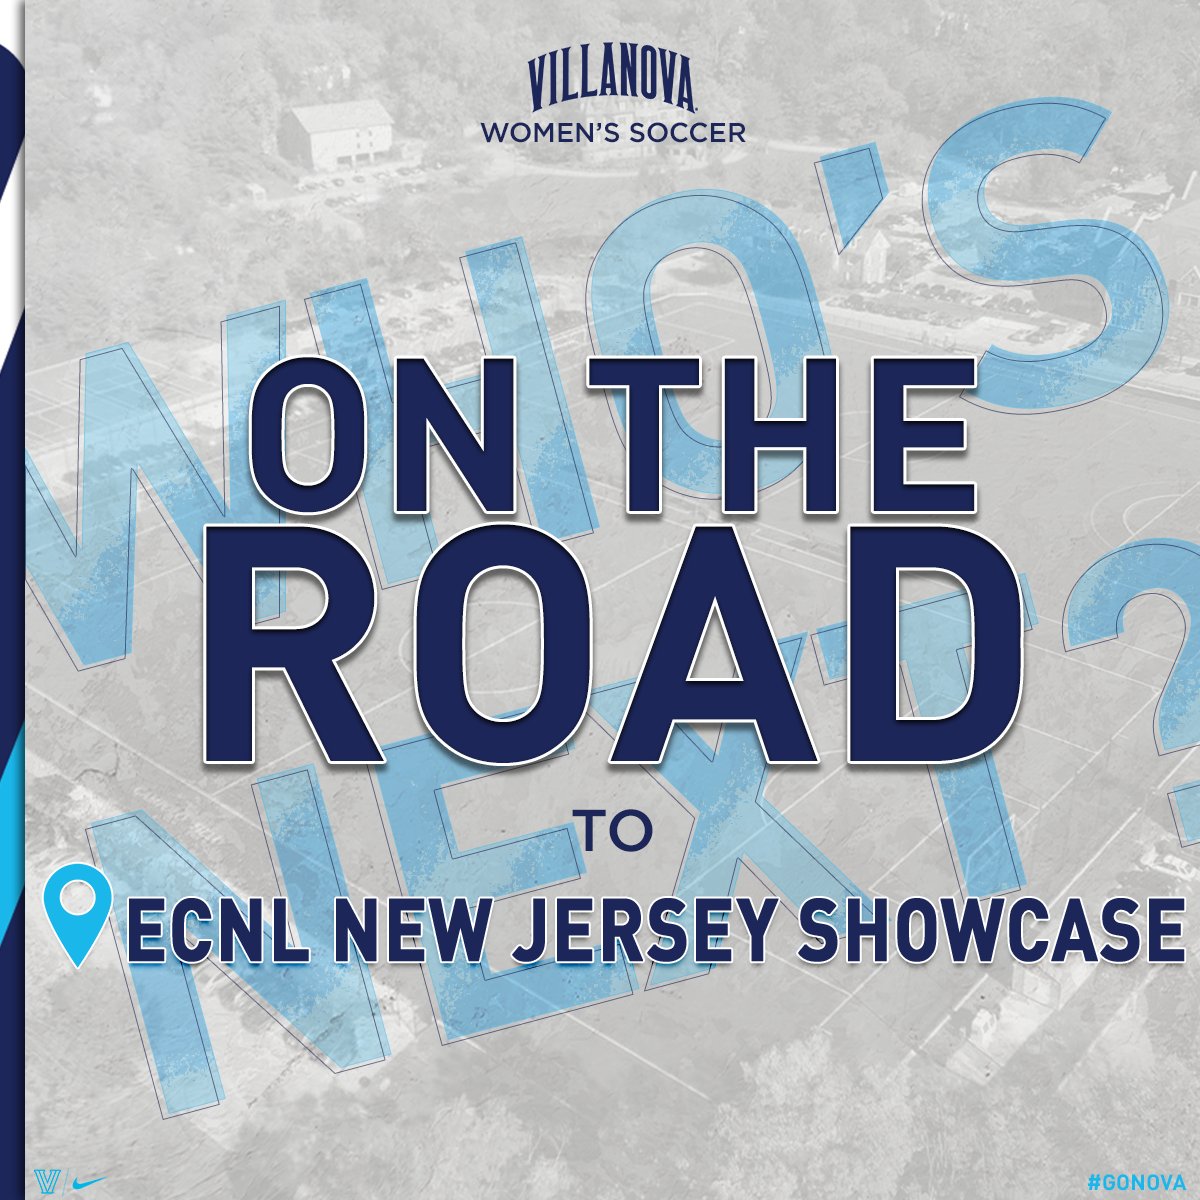 Another weekend of looking for future 'Cats! ✌️

📍 ECNL New Jersey showcase